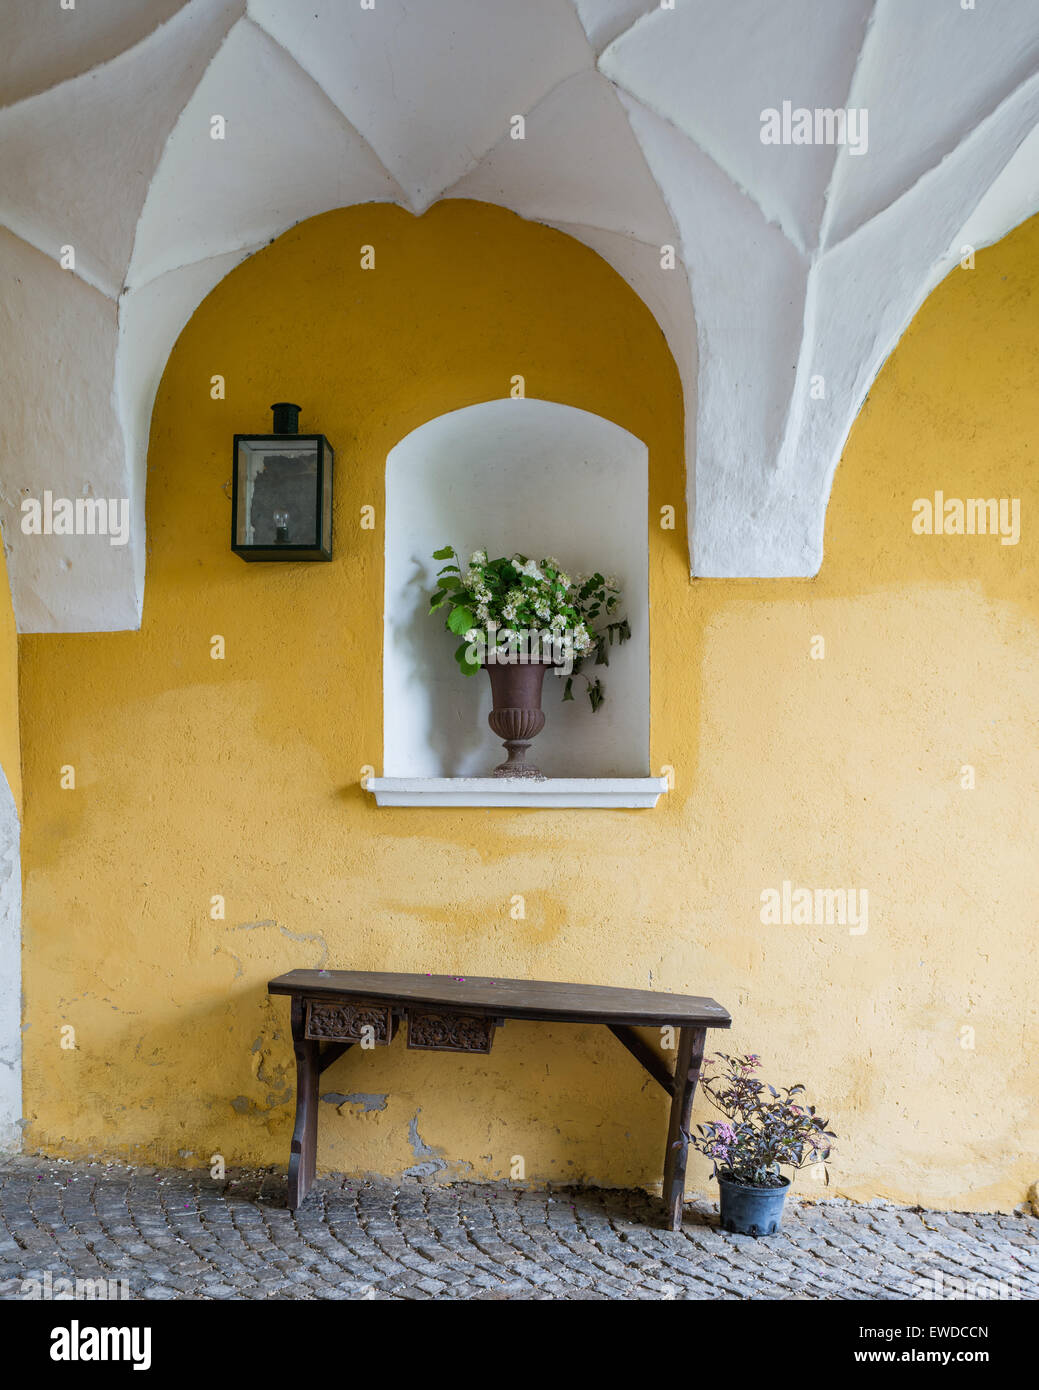 Wooden bench against yellow stone wall in entrance arch with vaulted ceiling Stock Photo